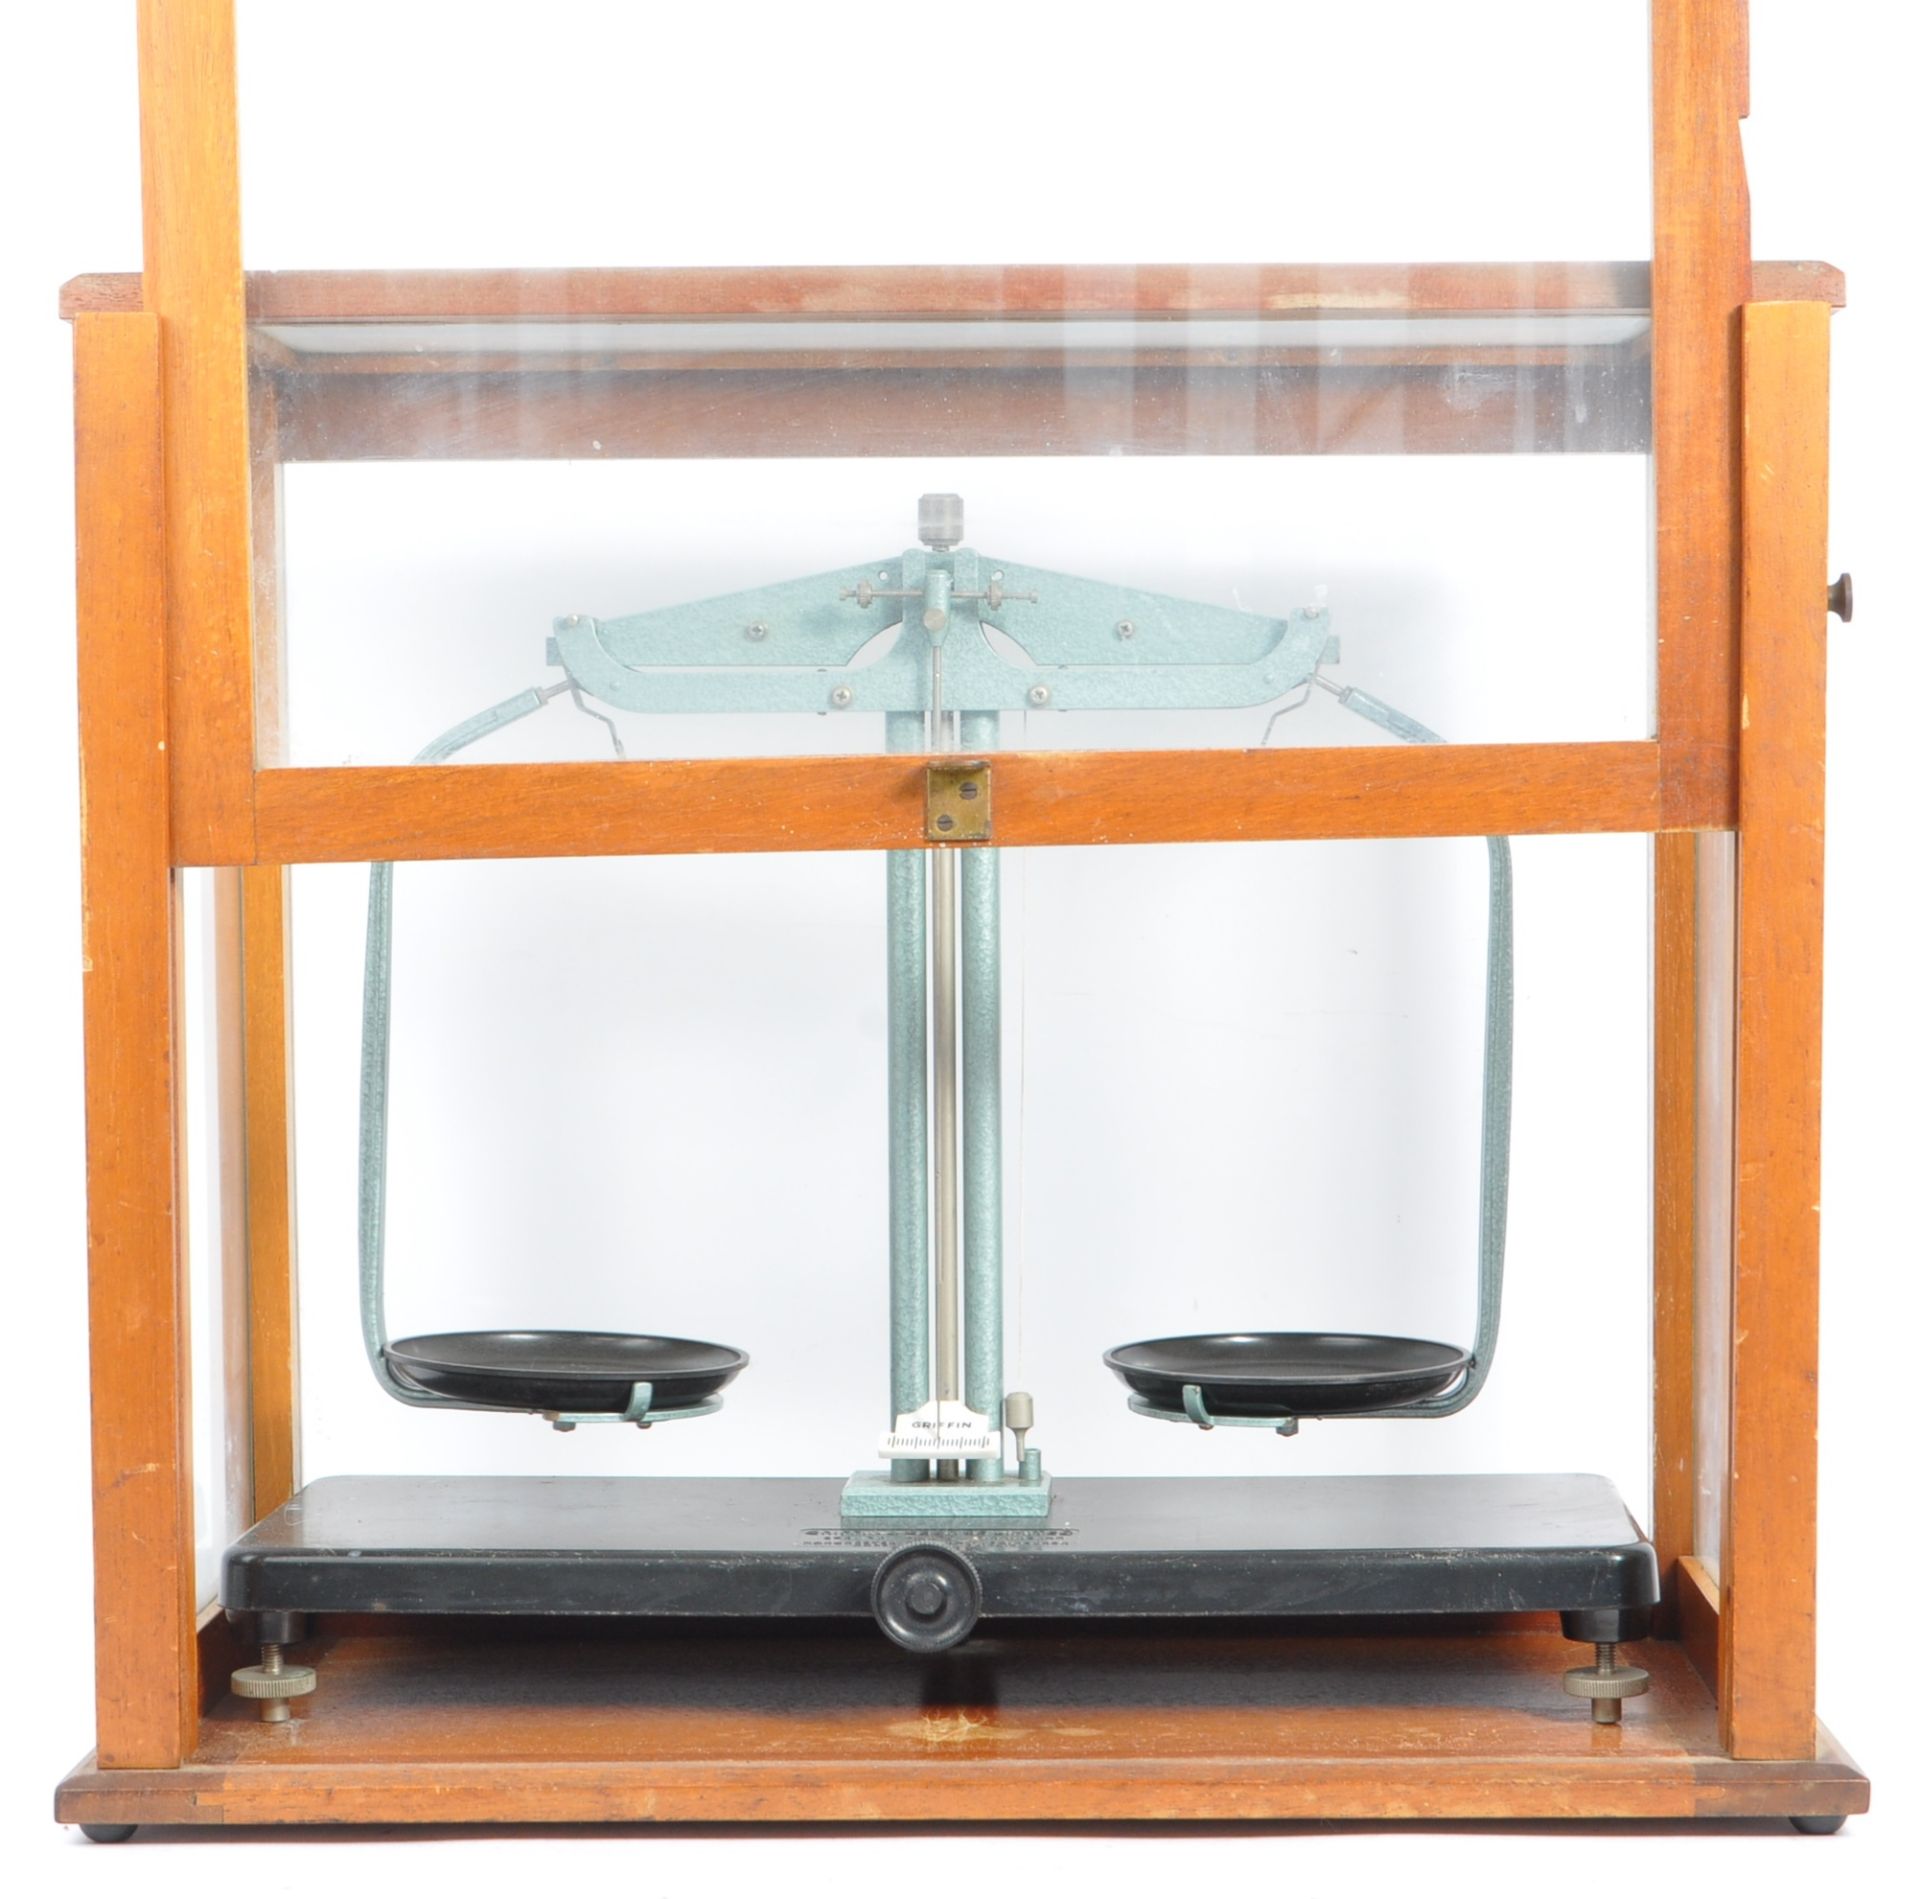 GRIFFIN & GEORGE OAK CASED SCIENTIFIC BALANCE SCALES - Image 2 of 7